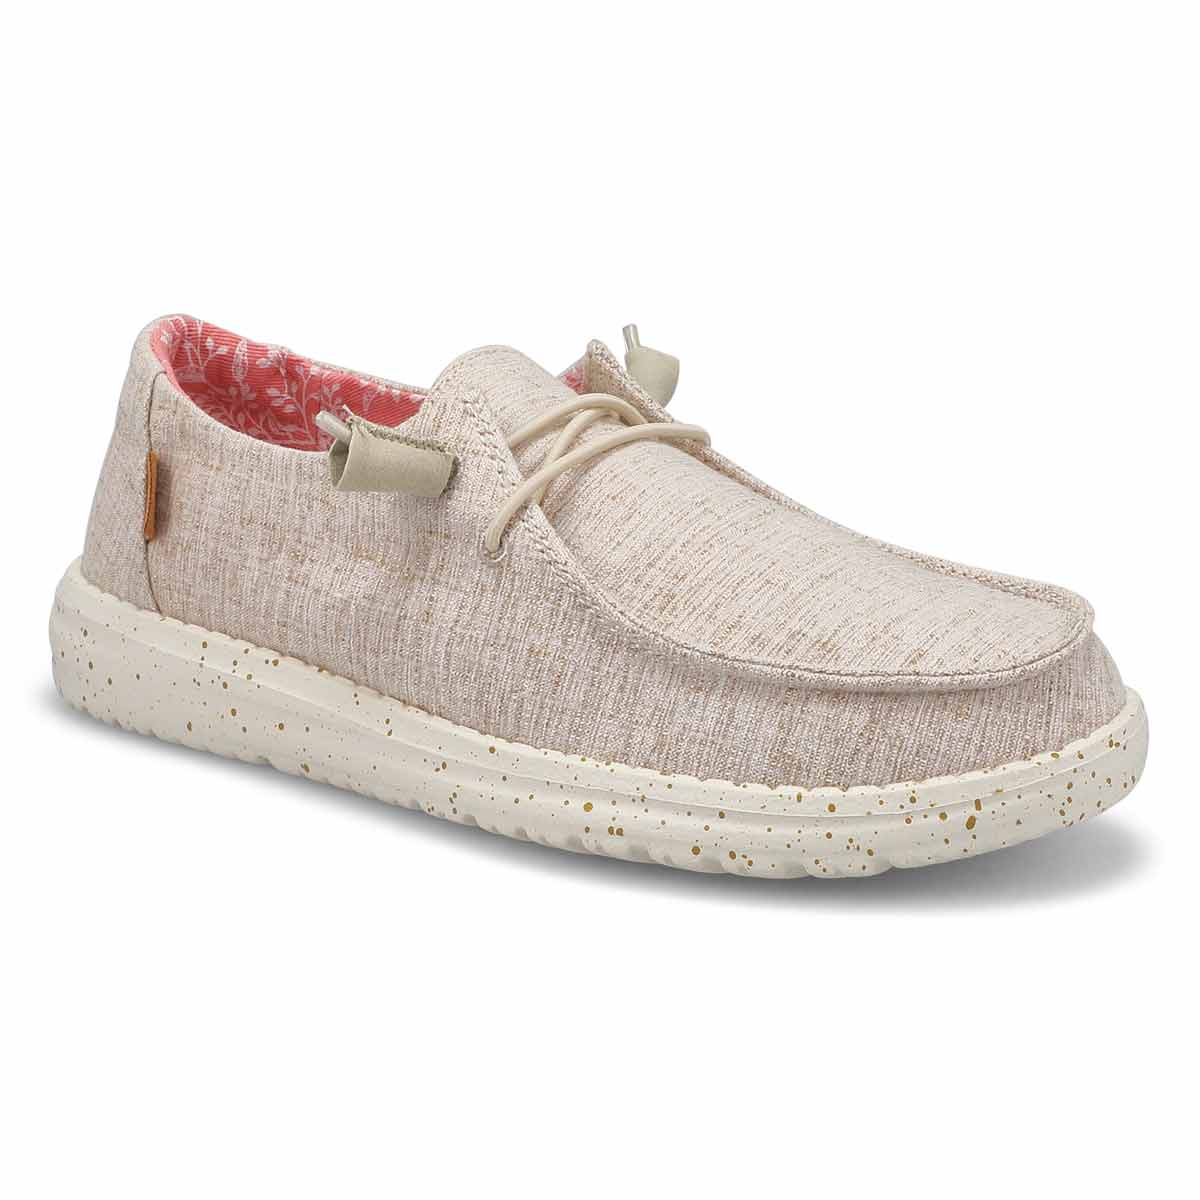 Women's Wendy Chambray Casual Shoe - White/Nut